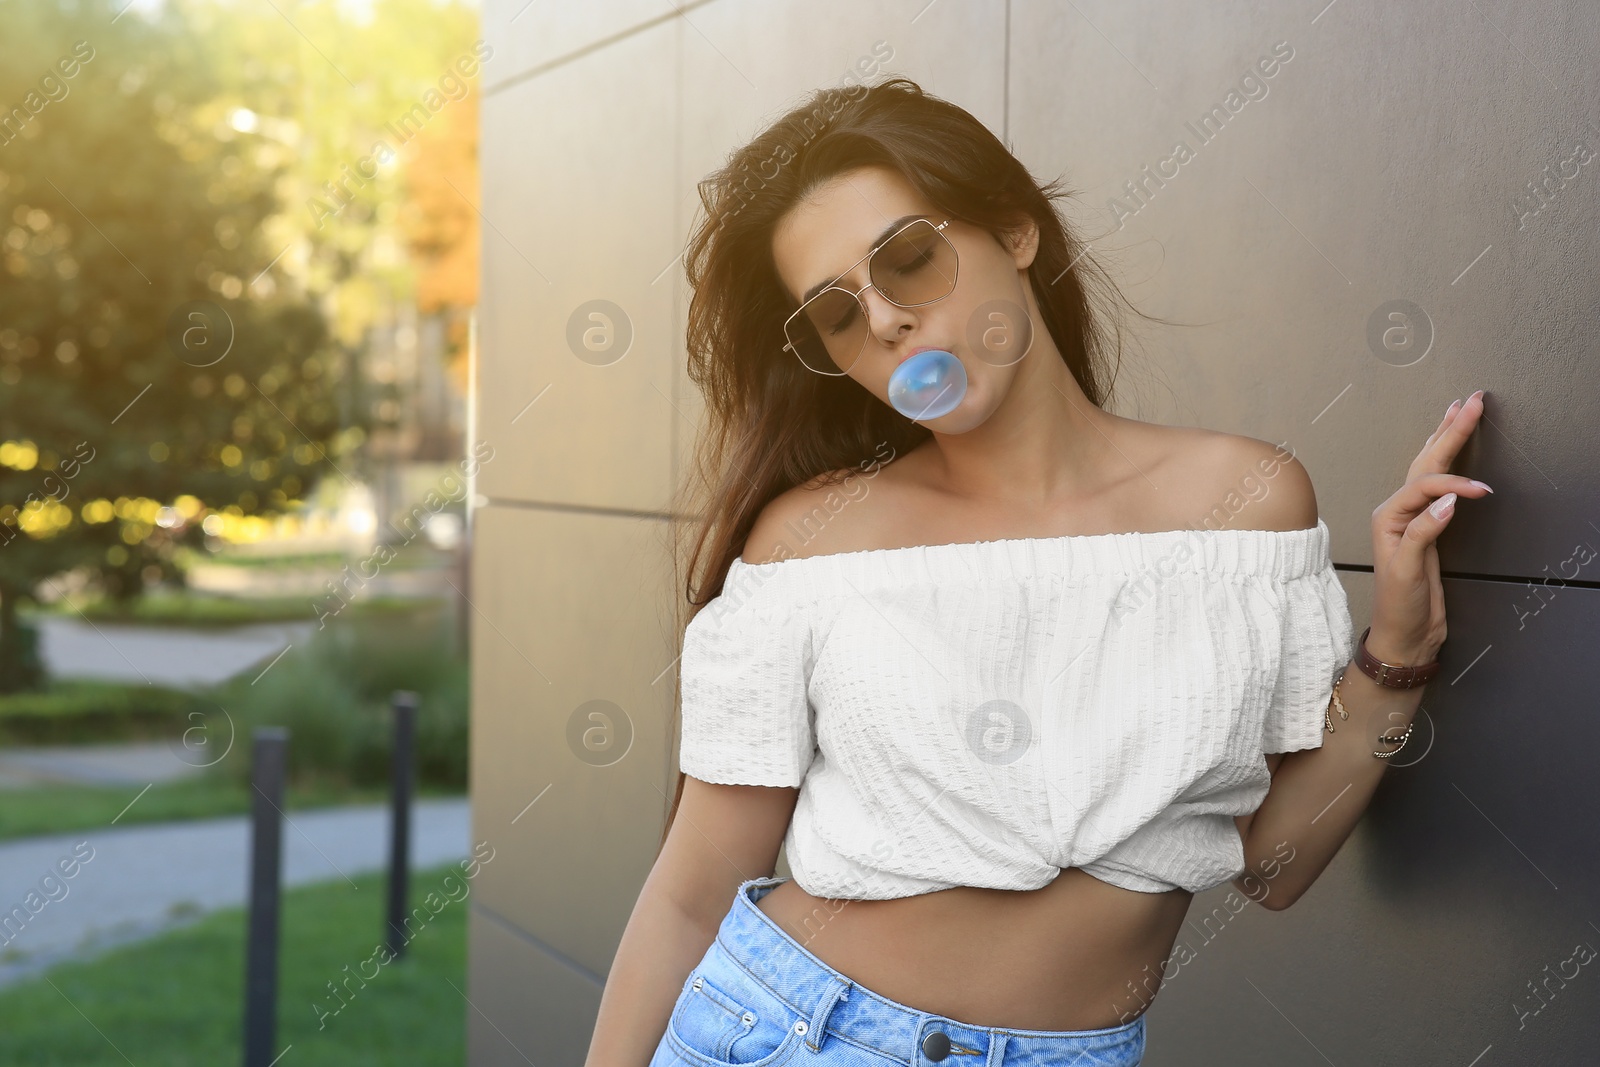 Photo of Beautiful woman blowing gum near dark tiled wall outdoors, space for text